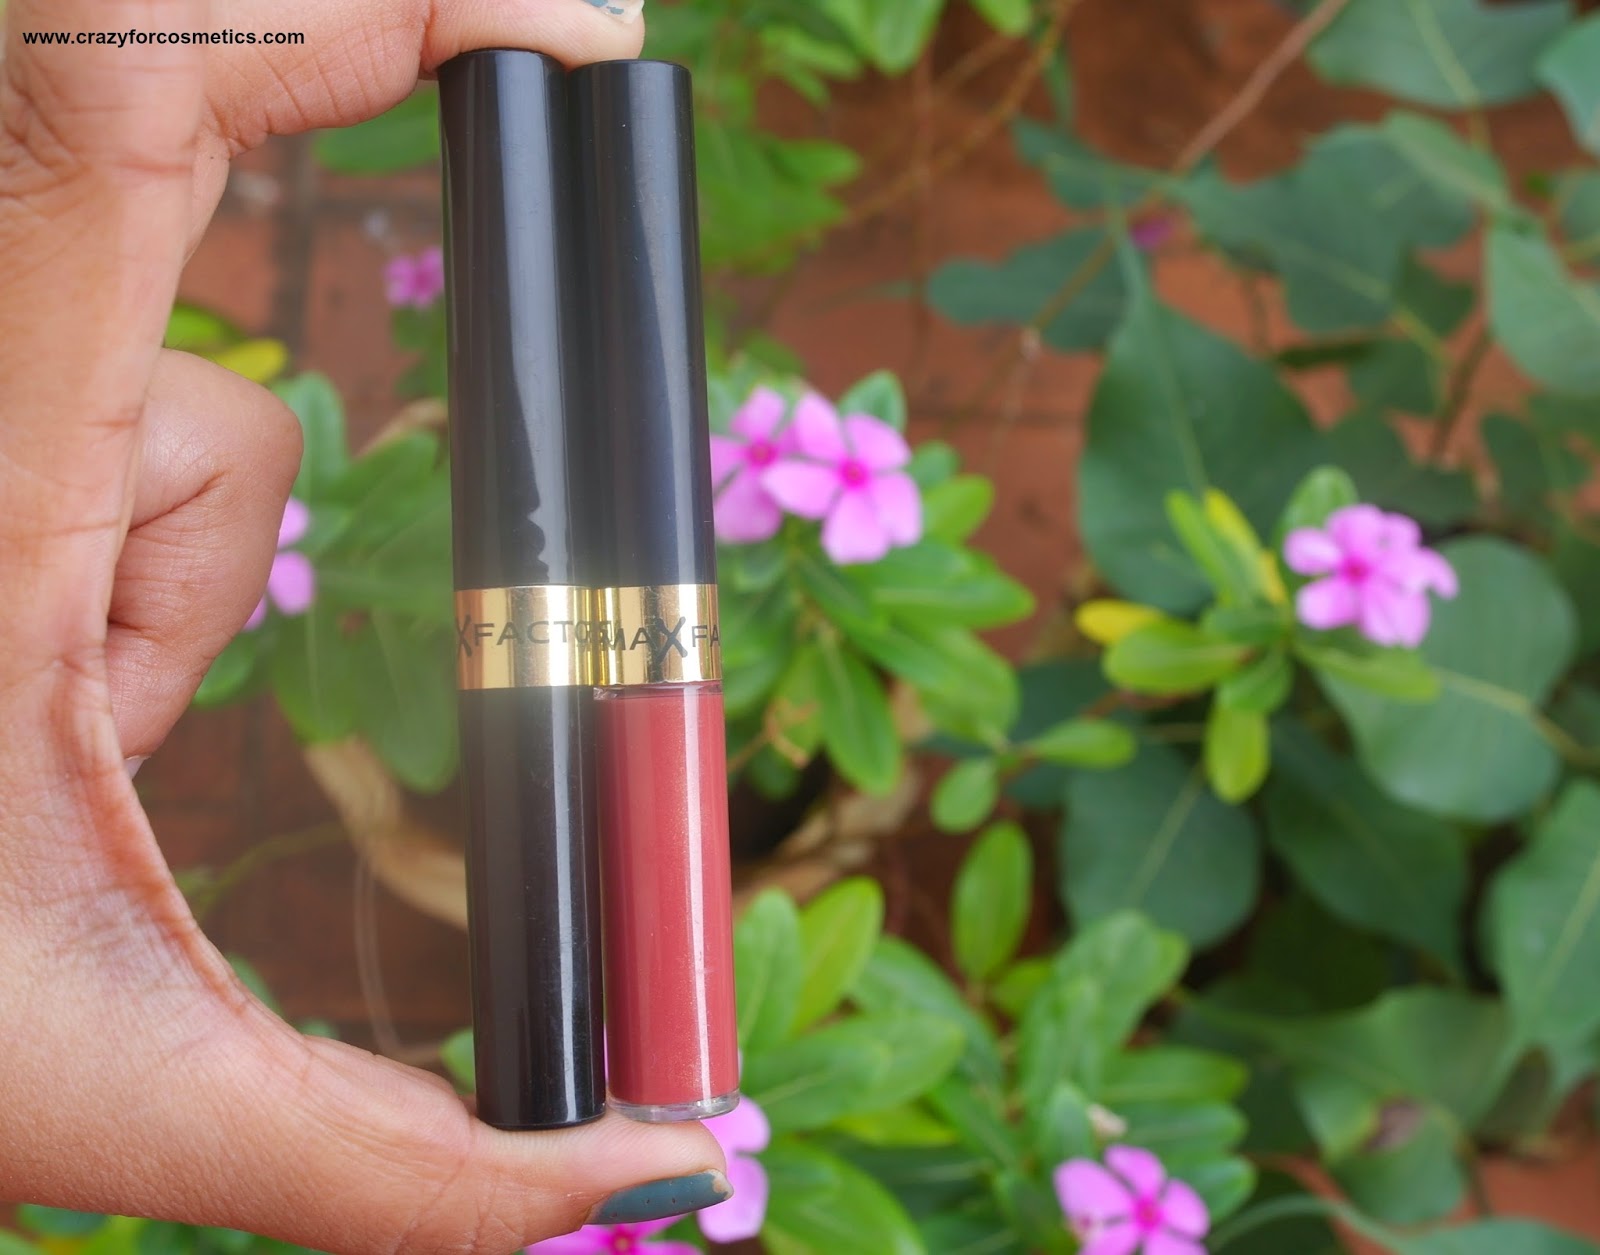 Max factor Lipfinity Lip Tint in Spicy in India